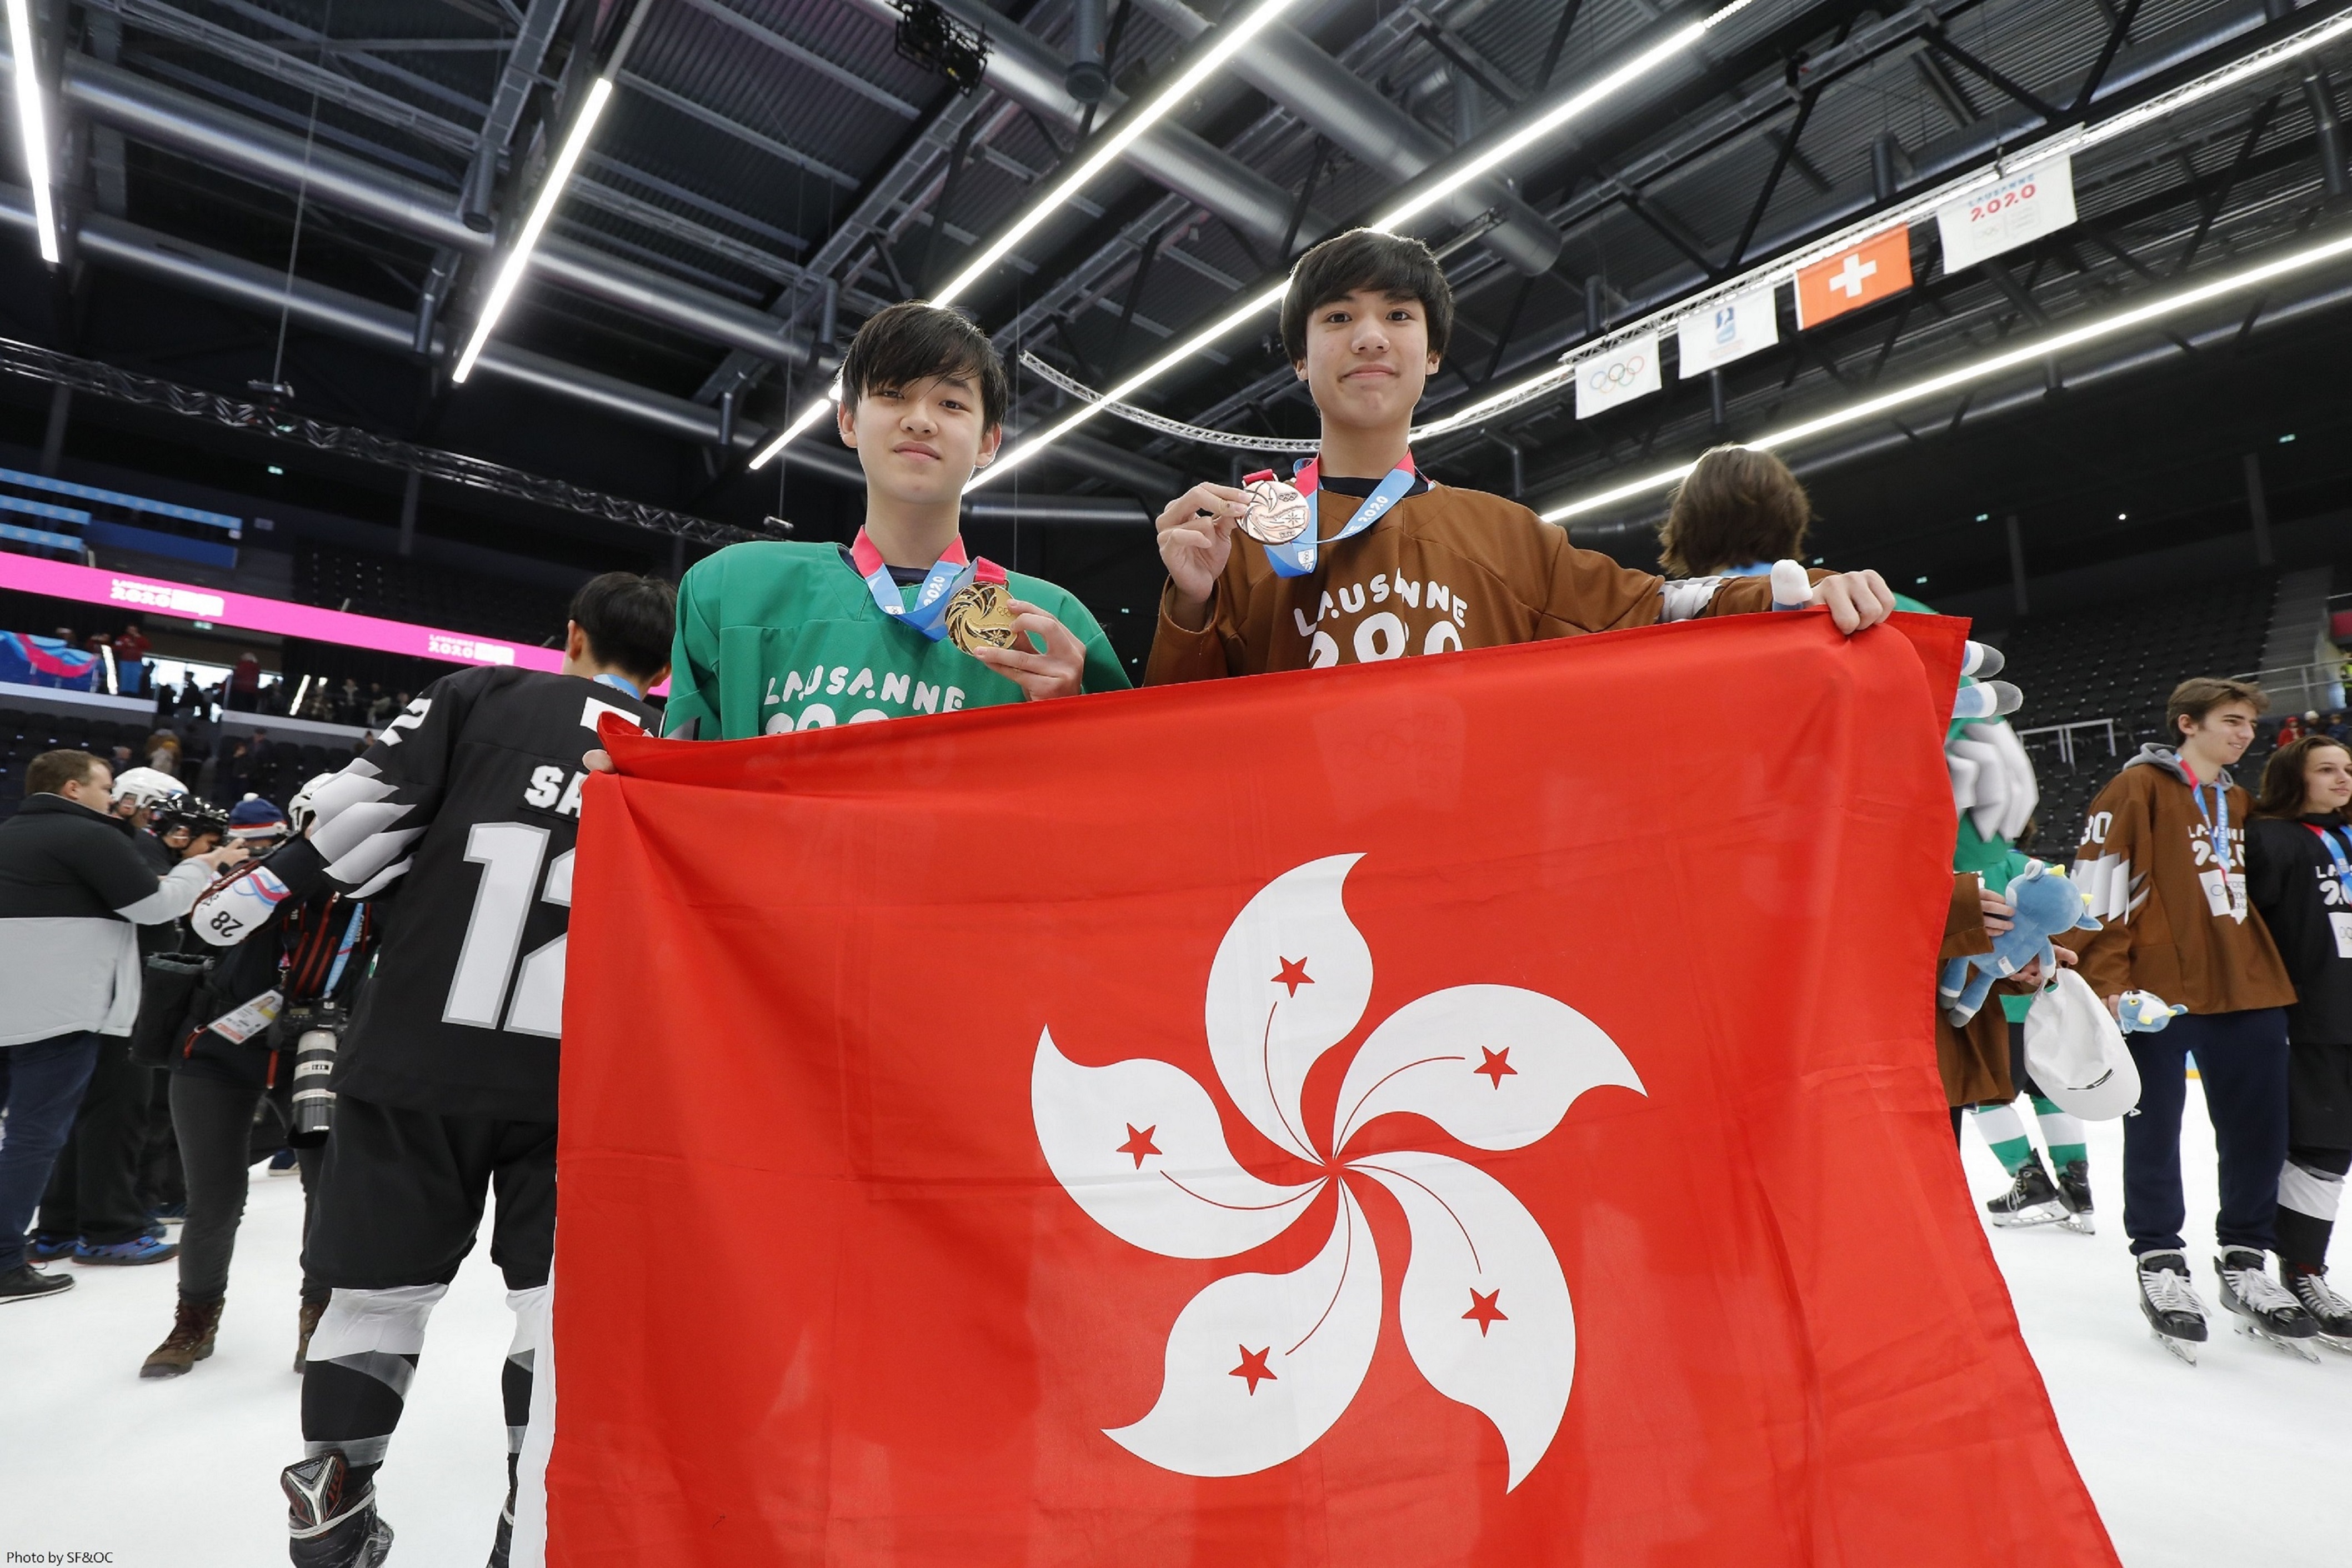 Yam Yau (left) and Elvis Hsu (right) made history for Hong Kong by clinching a gold and a bronze medal in the Men's Mixed NOC 3-on-3 event at the Winter Youth Olympics. 